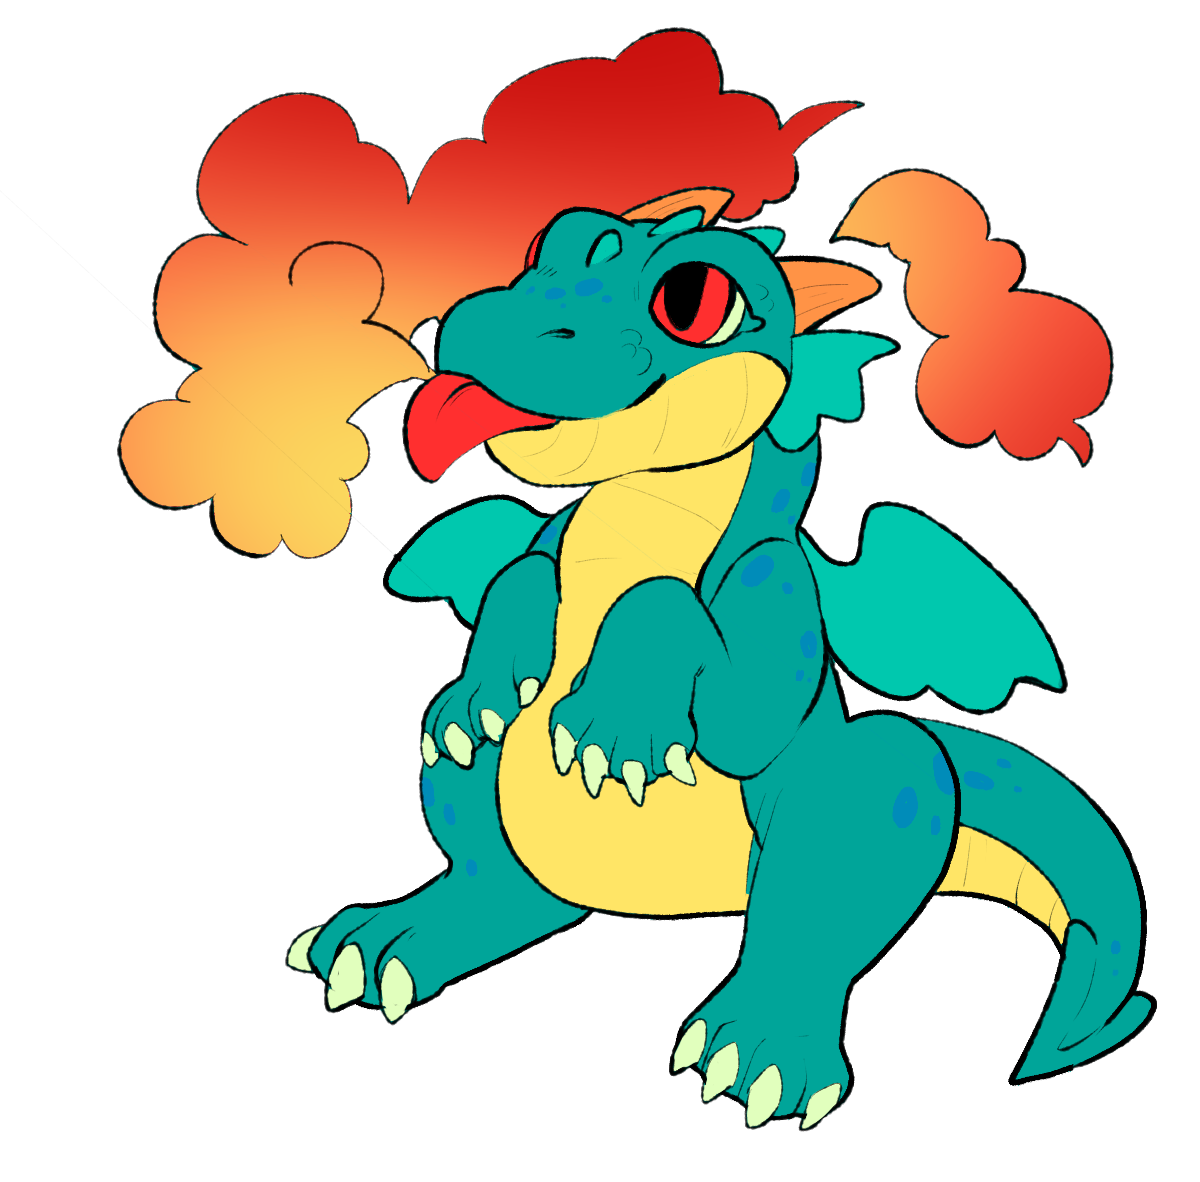 illustrated Baby dragon spouting fire